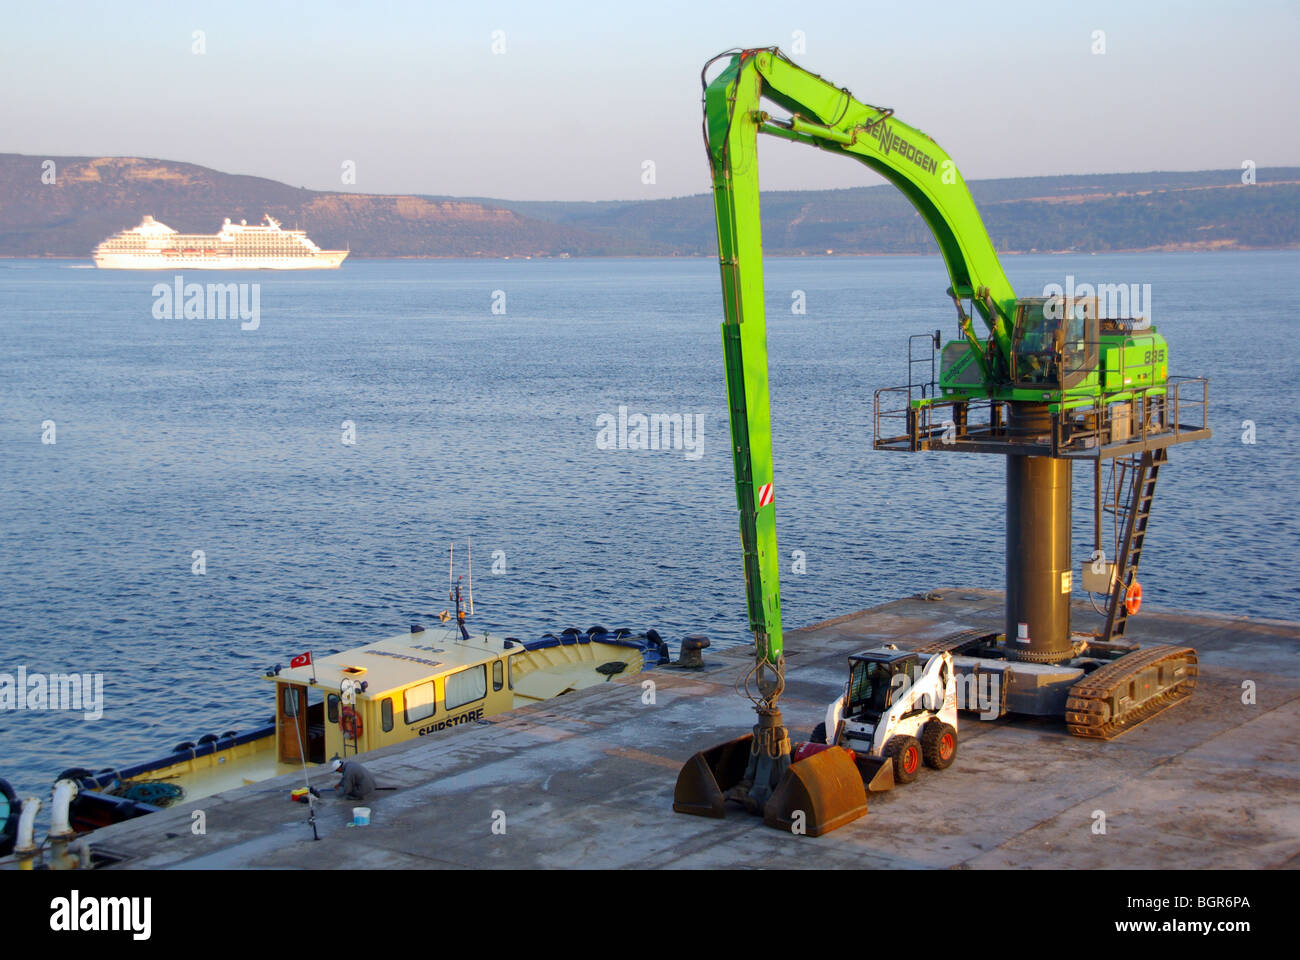 Canakkale dockyard mobile crane tracked vehicle with caterpillar tracks parked on quay beside small loader Turkey Asia Stock Photo